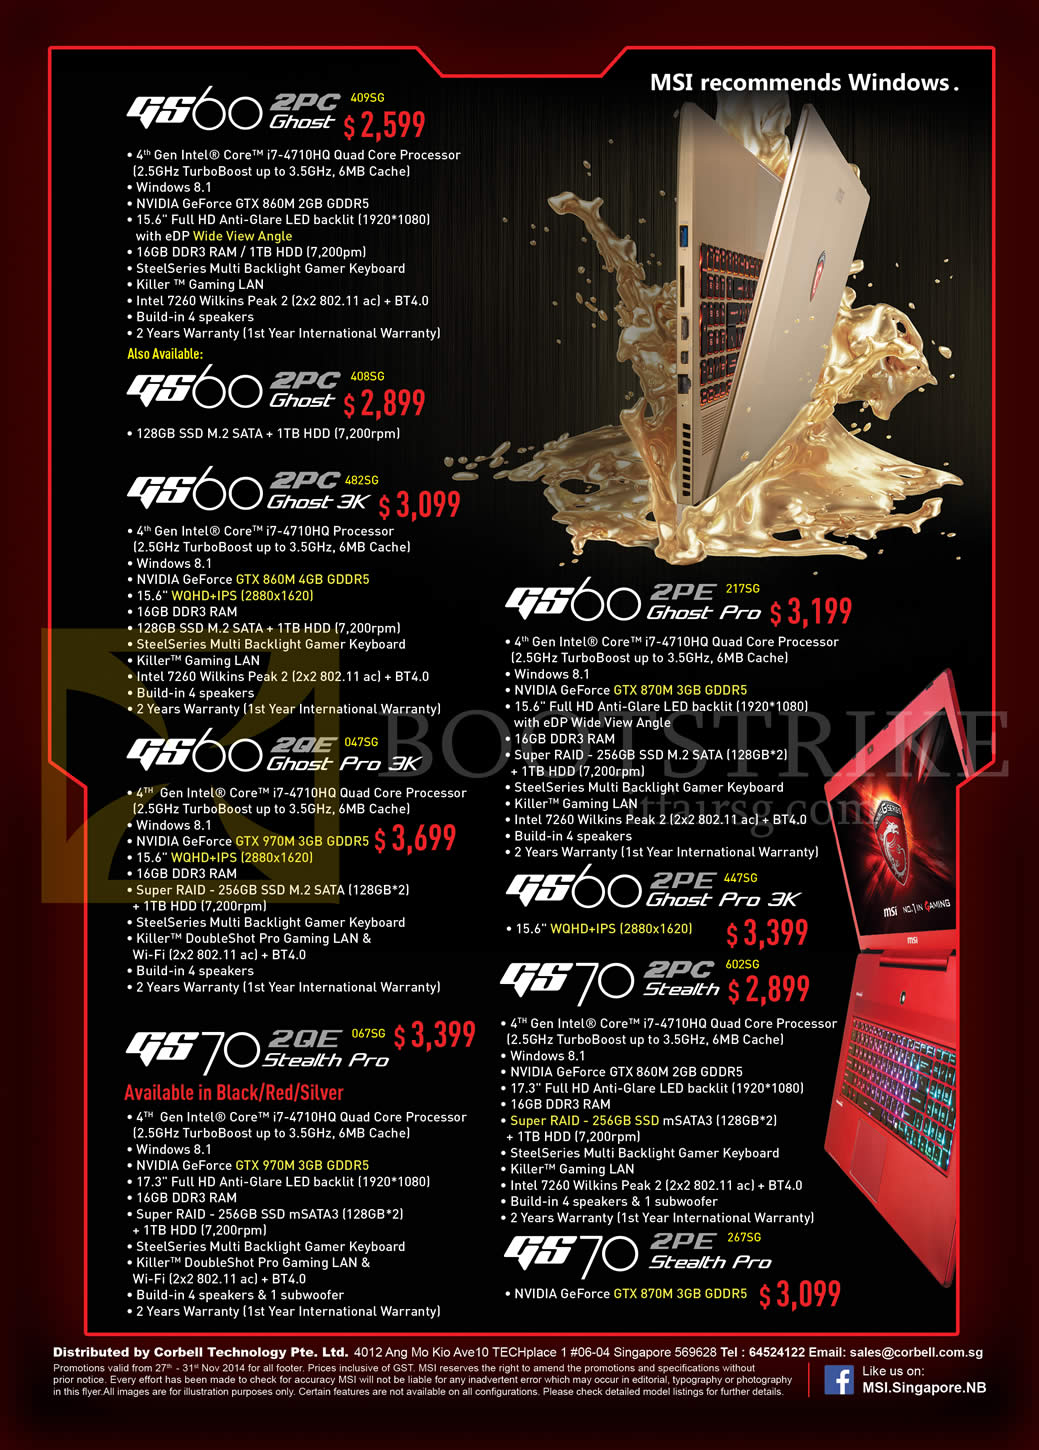 SITEX 2014 price list image brochure of MSI Notebooks GS60 2PC Ghost, Ghost 3K, GS60 2QE Ghost Pro 3K, Stealth Pro, GS60 2PE Ghost Pro, Ghost Pro 3K, GS70 2PC Stealth, Stealth Pro